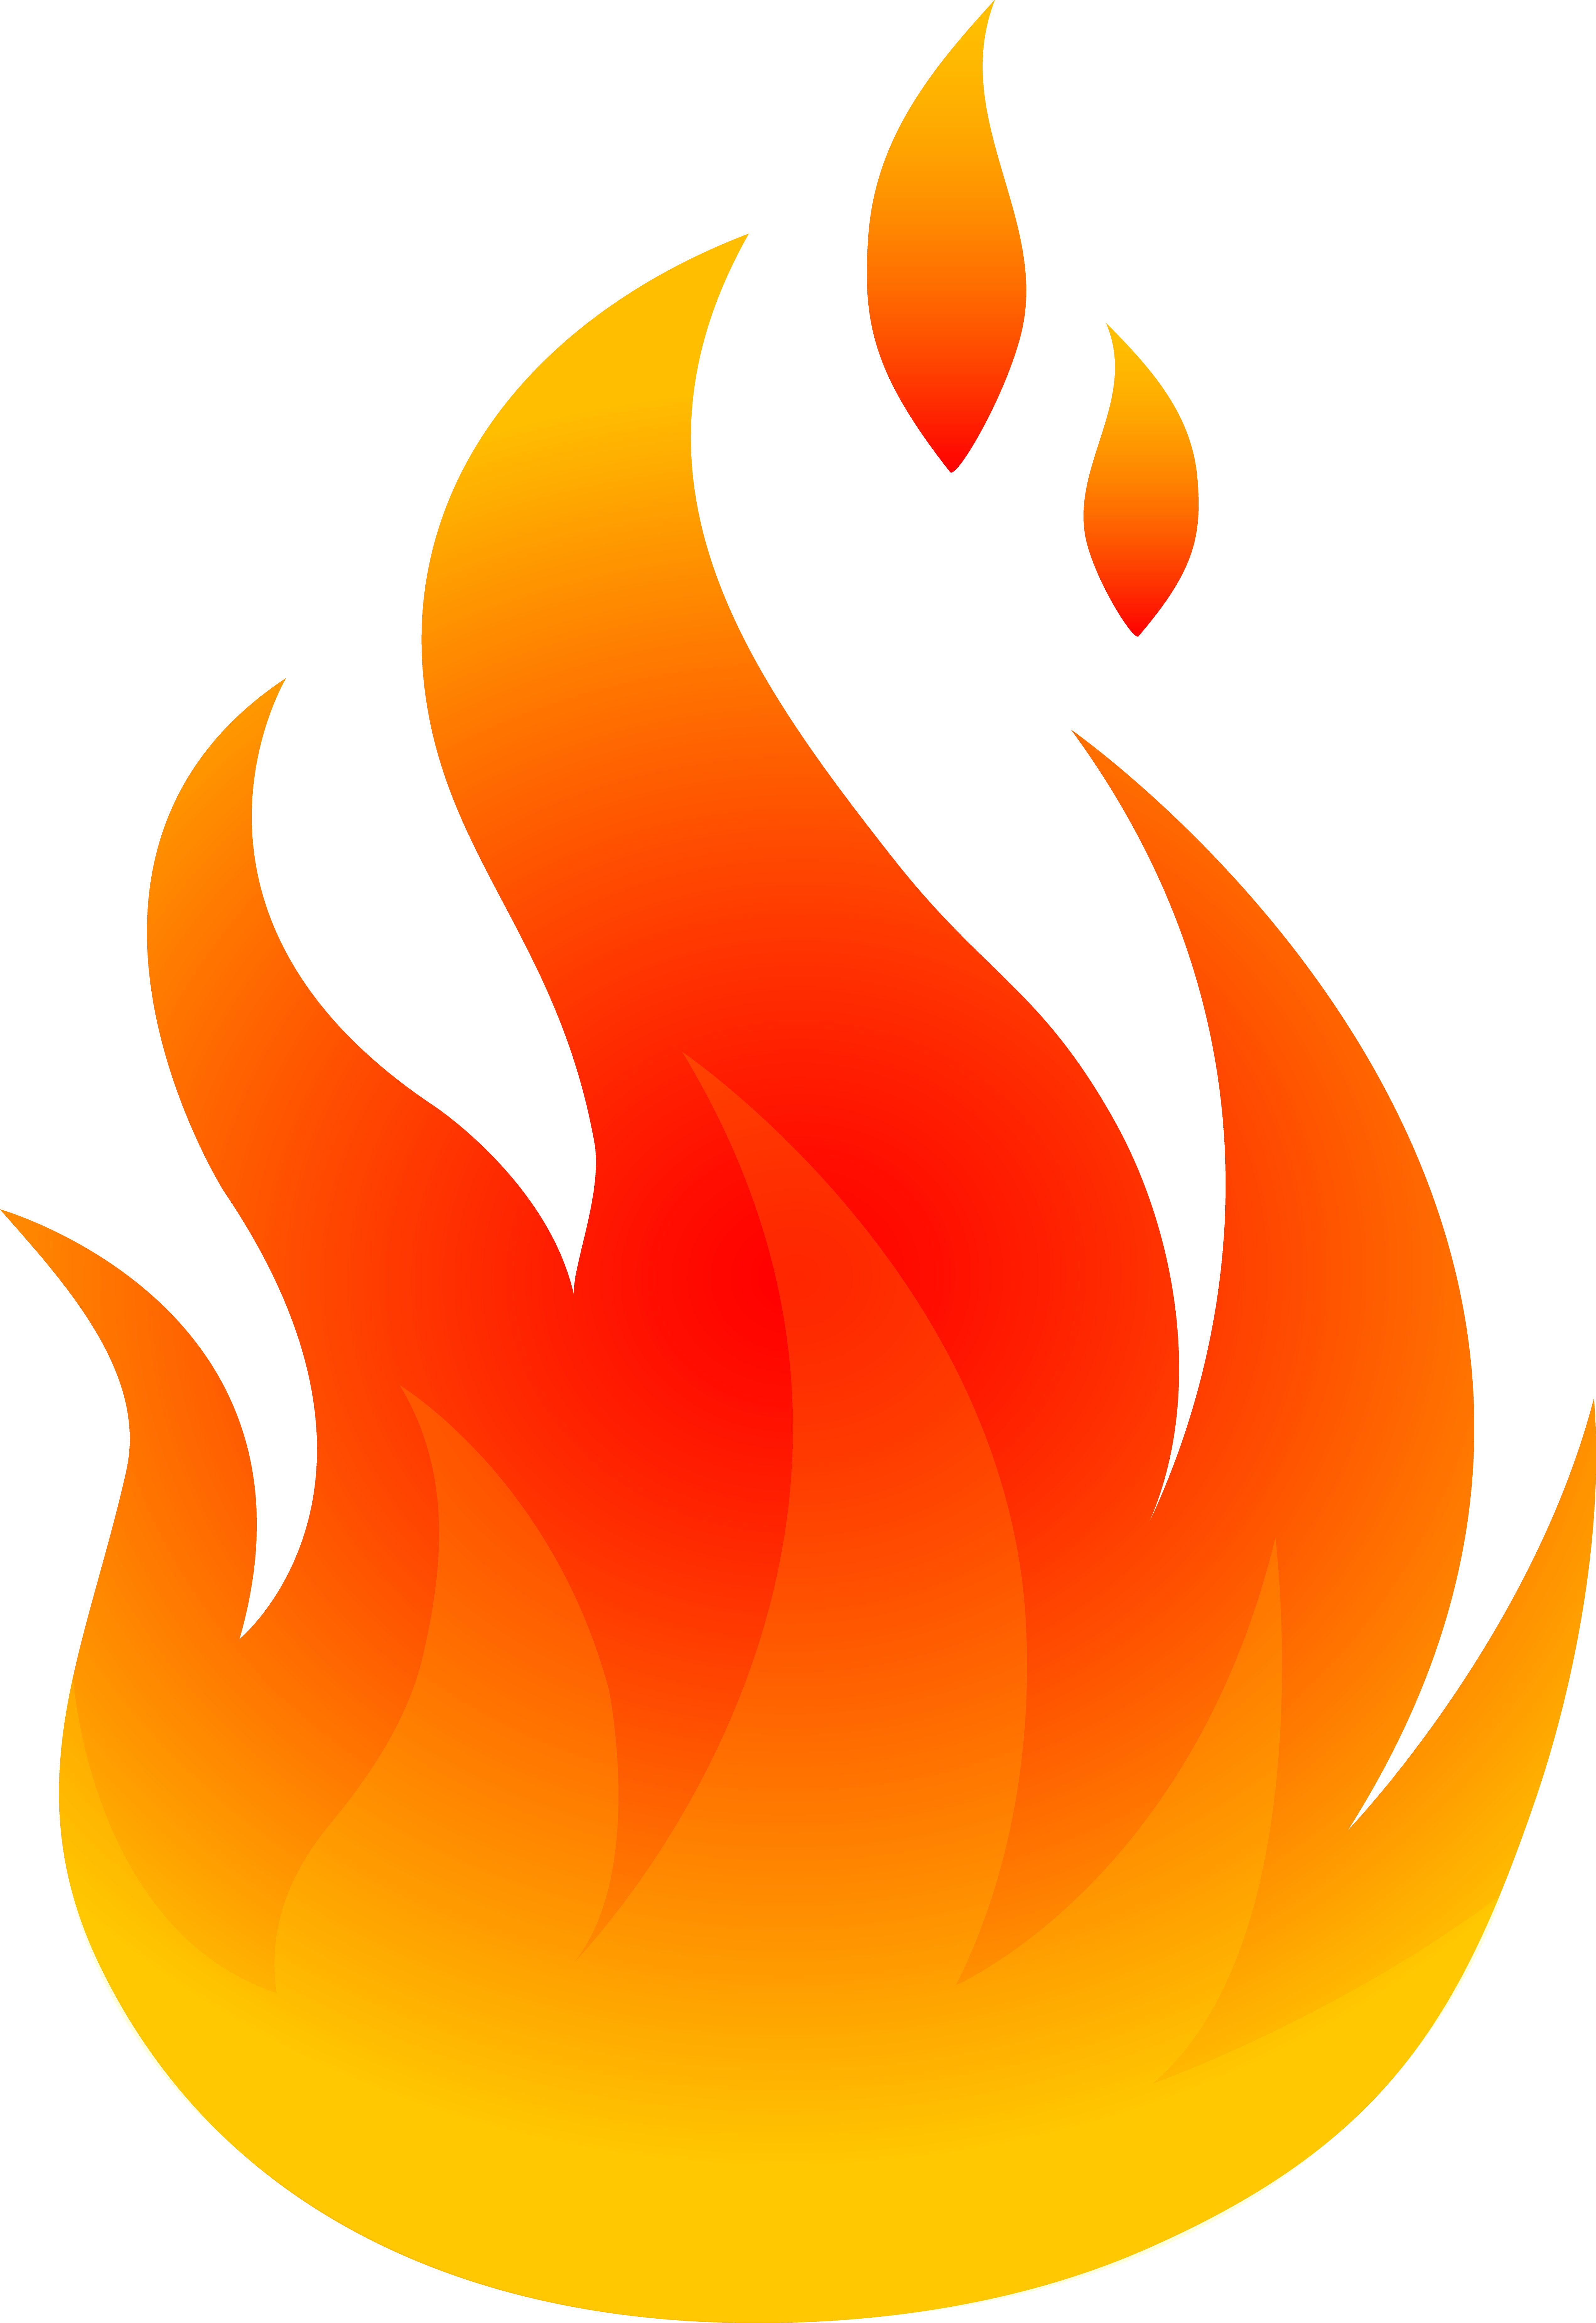 Flame design icon png #4871 - Free Icons and PNG Backgrounds